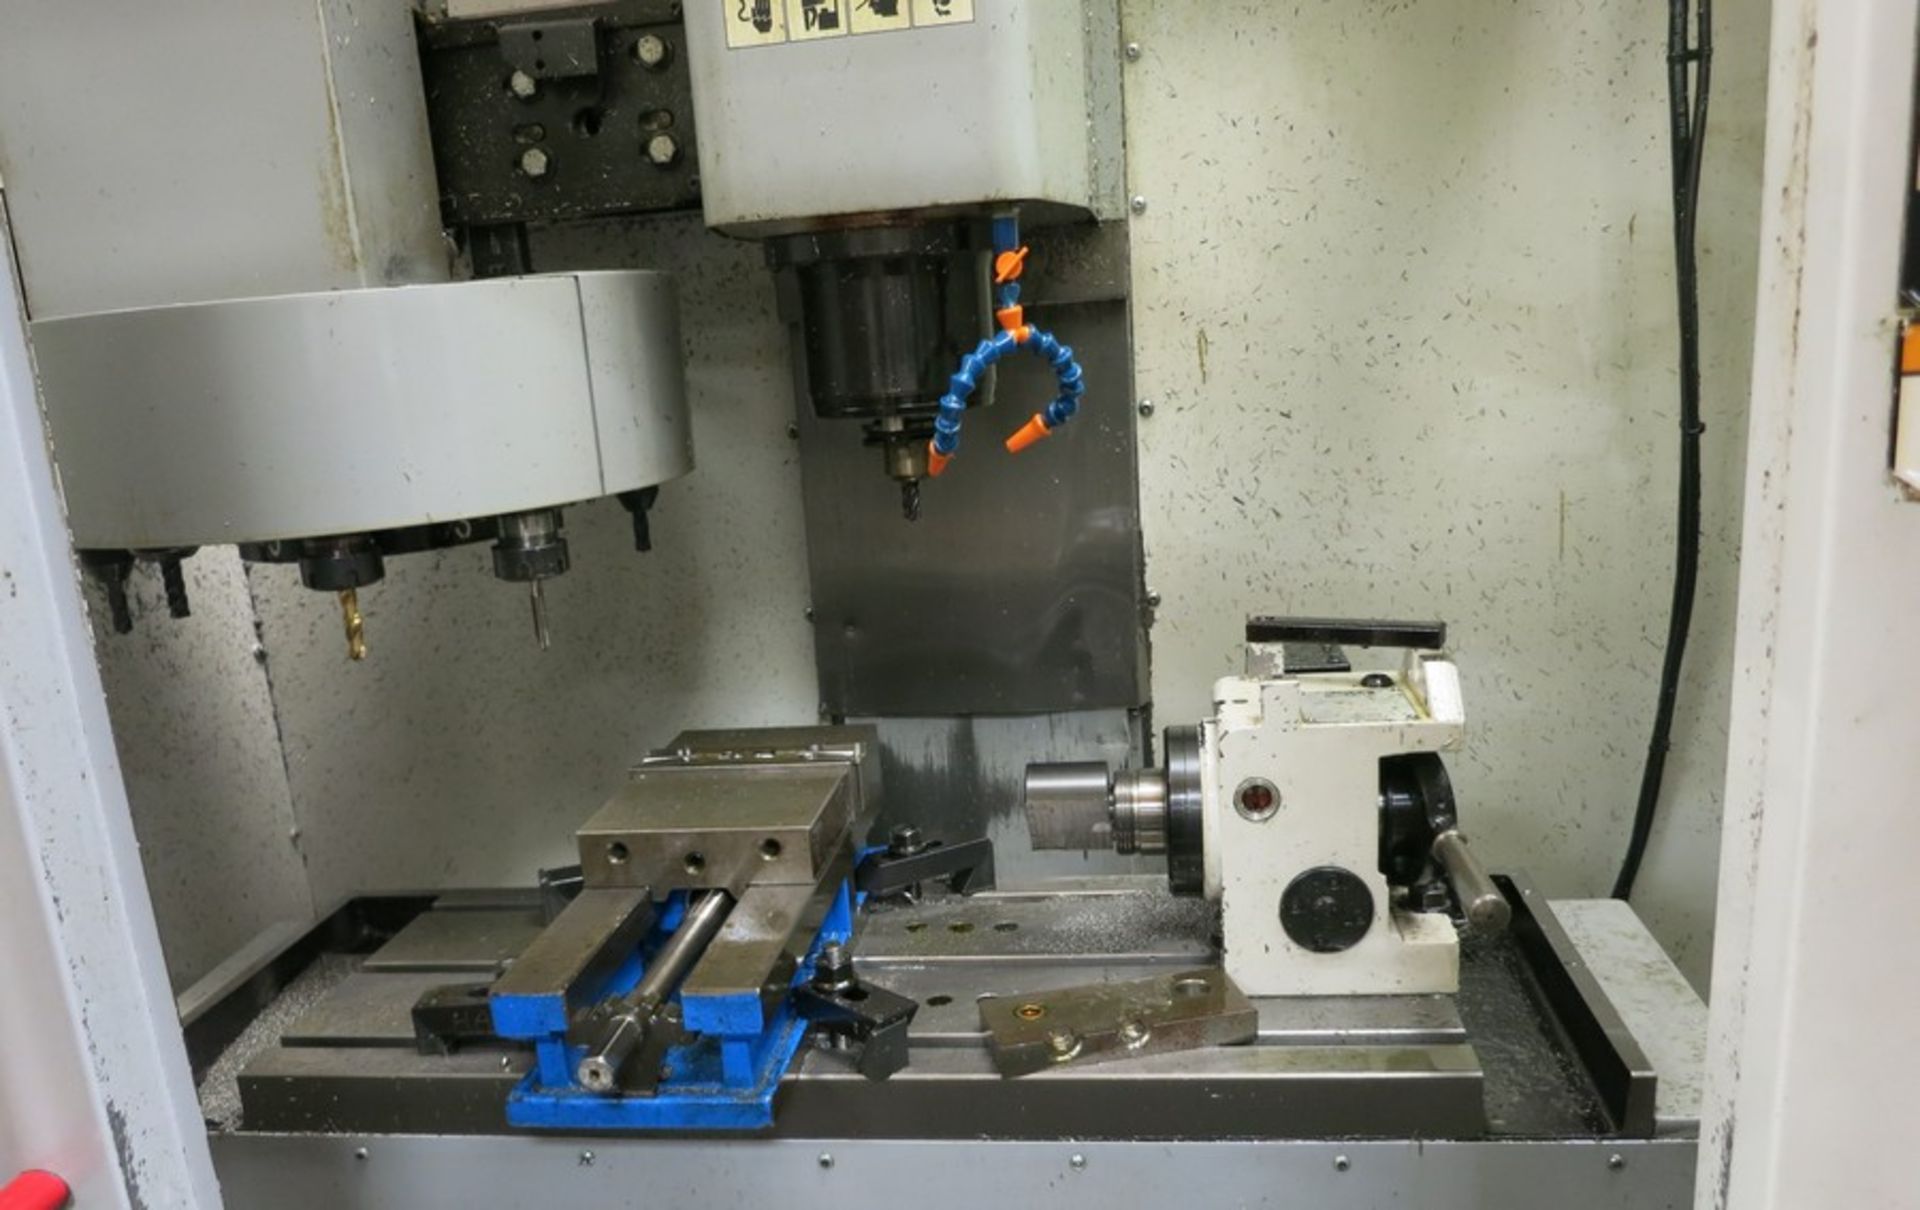 HAAS MINIMILL 4-AXIS CNC VERTICALMACHINING CENTER, S/N 40310, NEW 2005 - Image 3 of 10